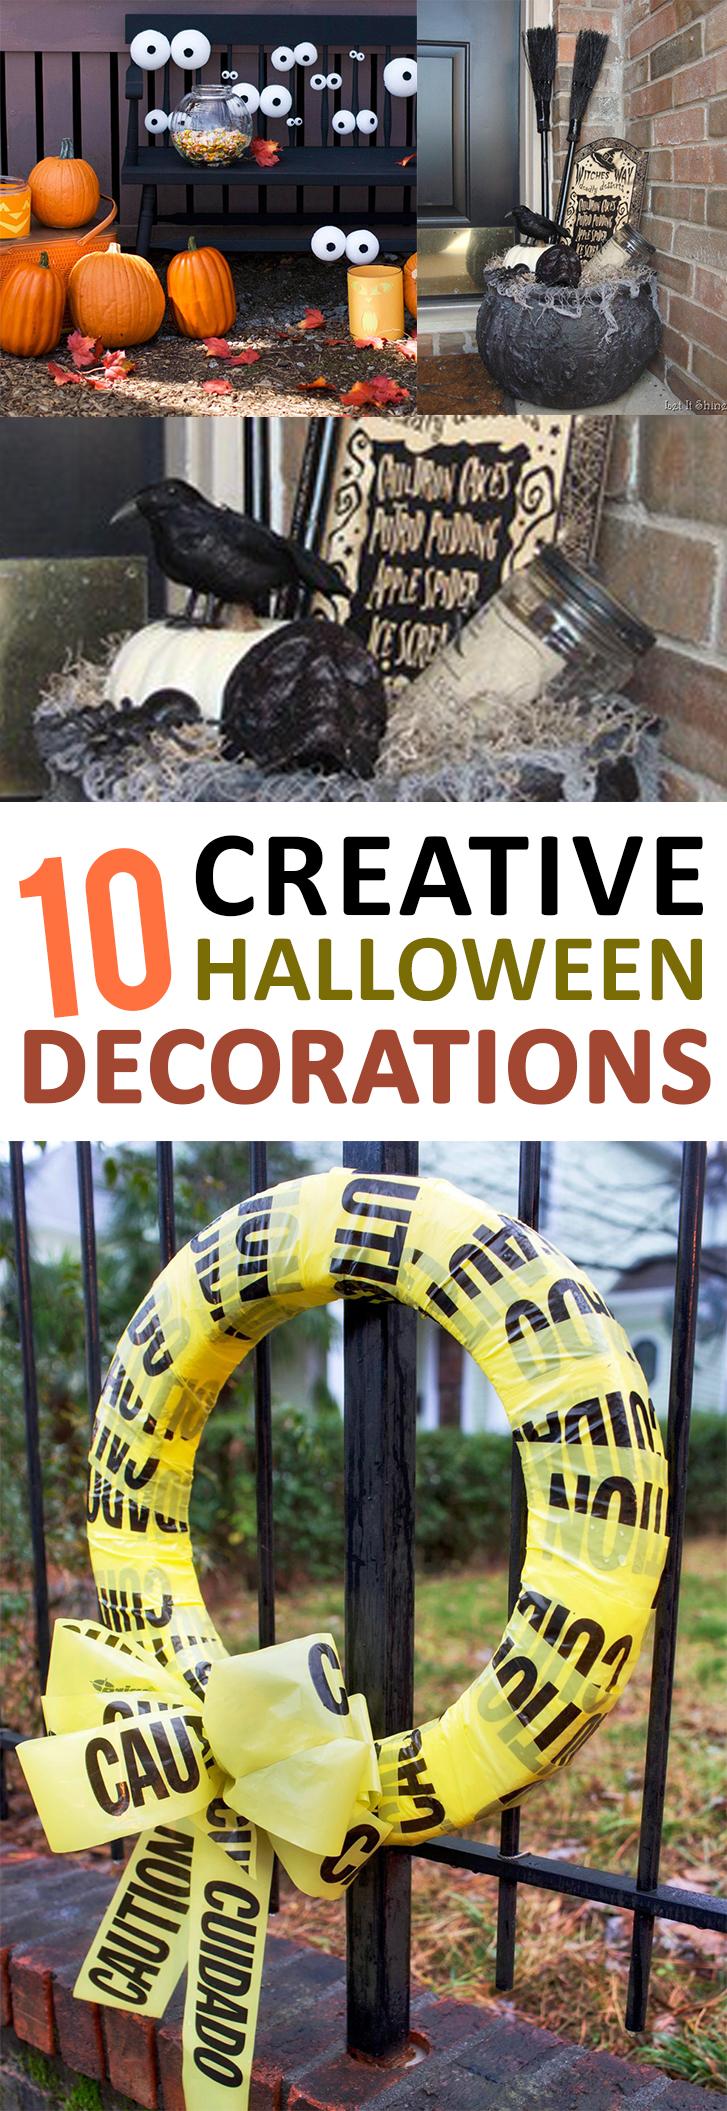 Halloween, Halloween decorations, popular pin, fall front porch, front porch decor, DIY porch projects, fall holiday